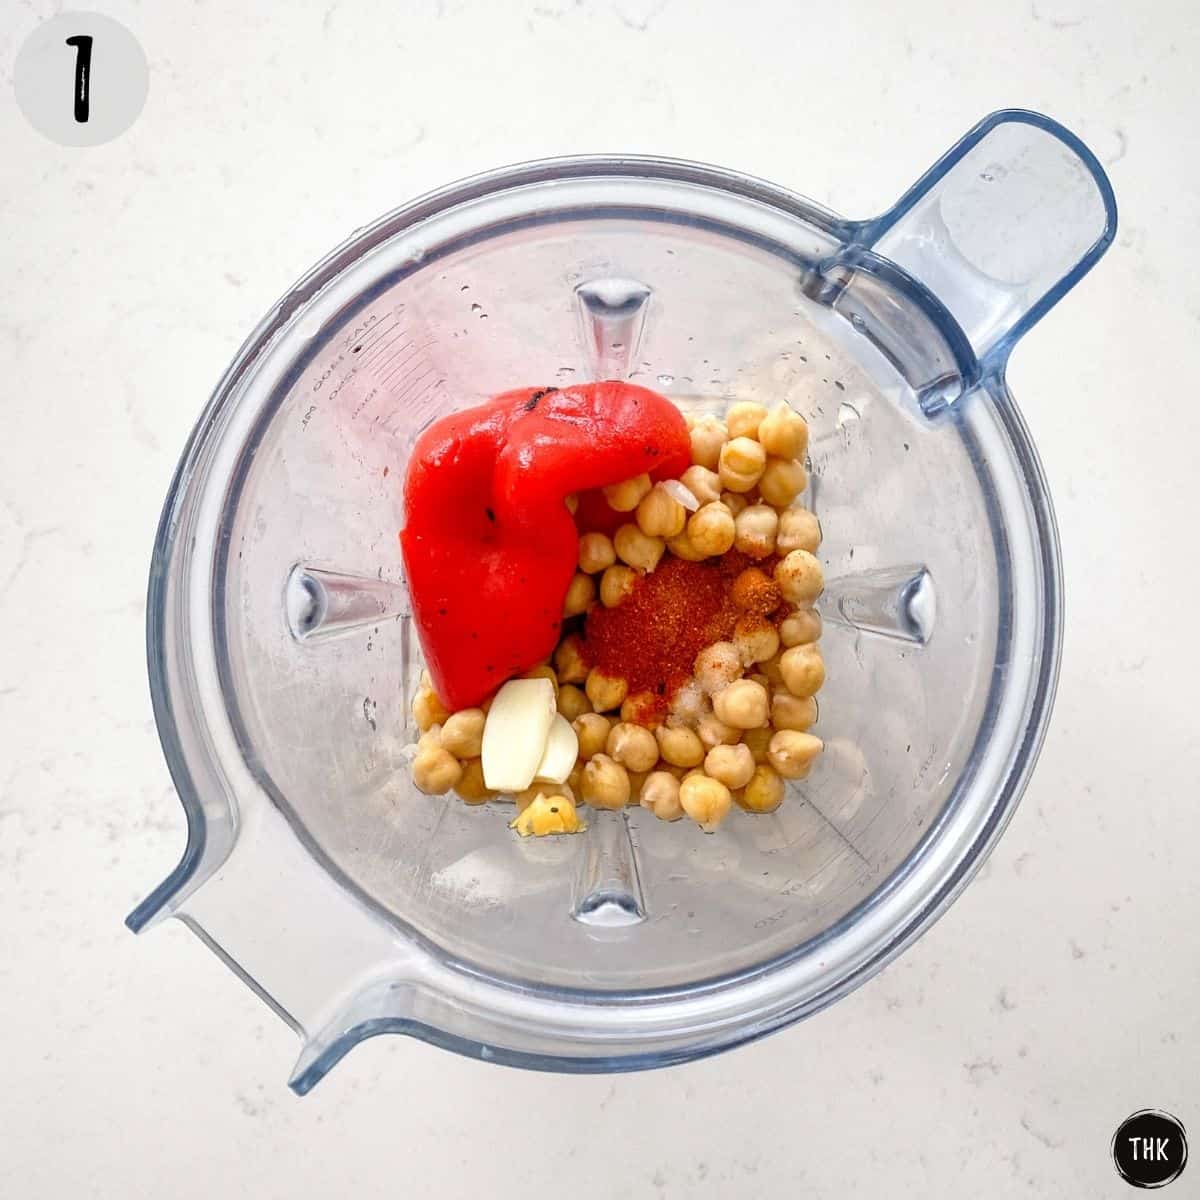 Blender with red peppers, chickpeas, garlic and seasoning inside.